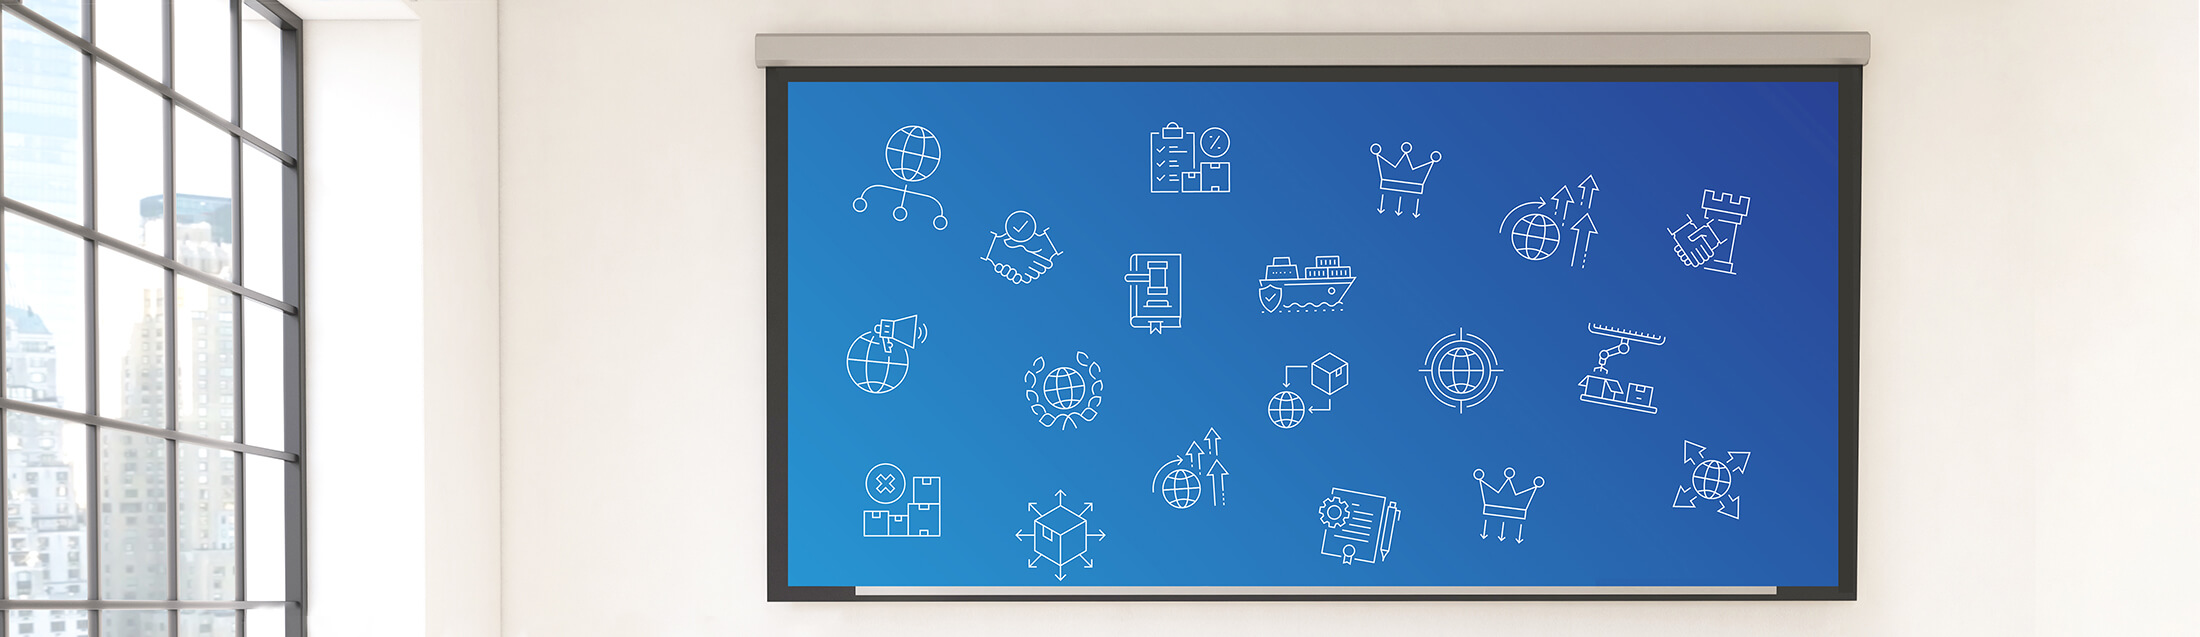 A blue wallboard in an office with global icons written on it in white.